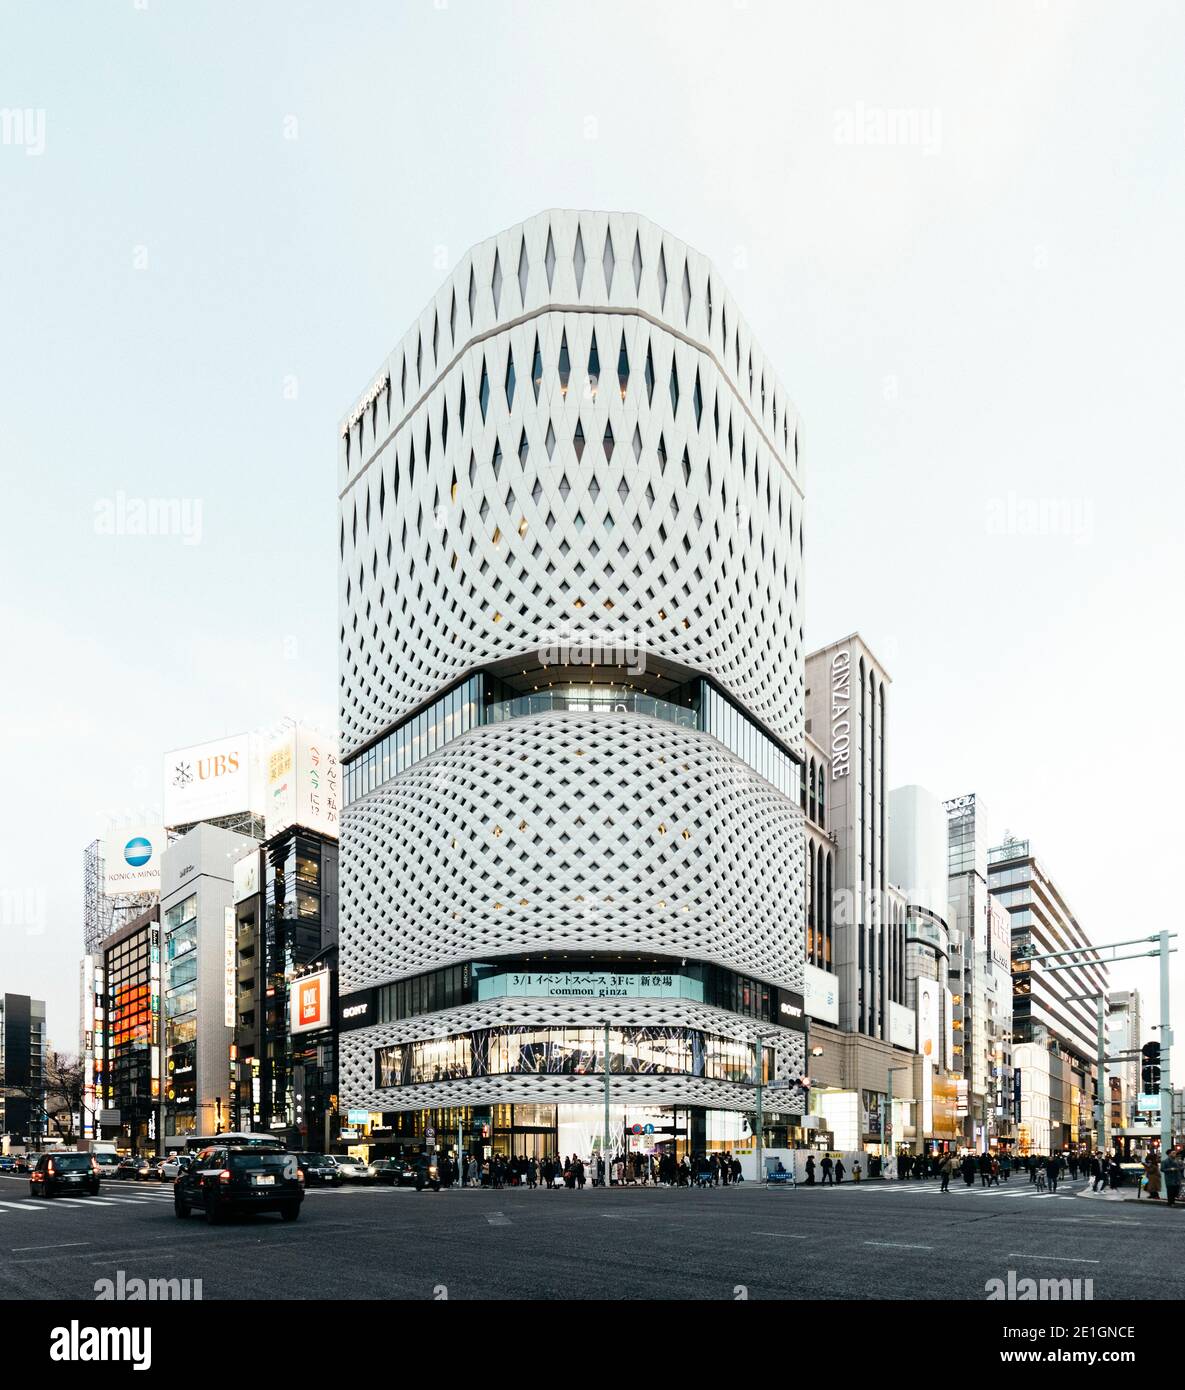 Exterior view of the curved lattice facade of Ginza Place, a major commercial development in Tokyo’s famous Ginza shopping district, Japan. Stock Photo